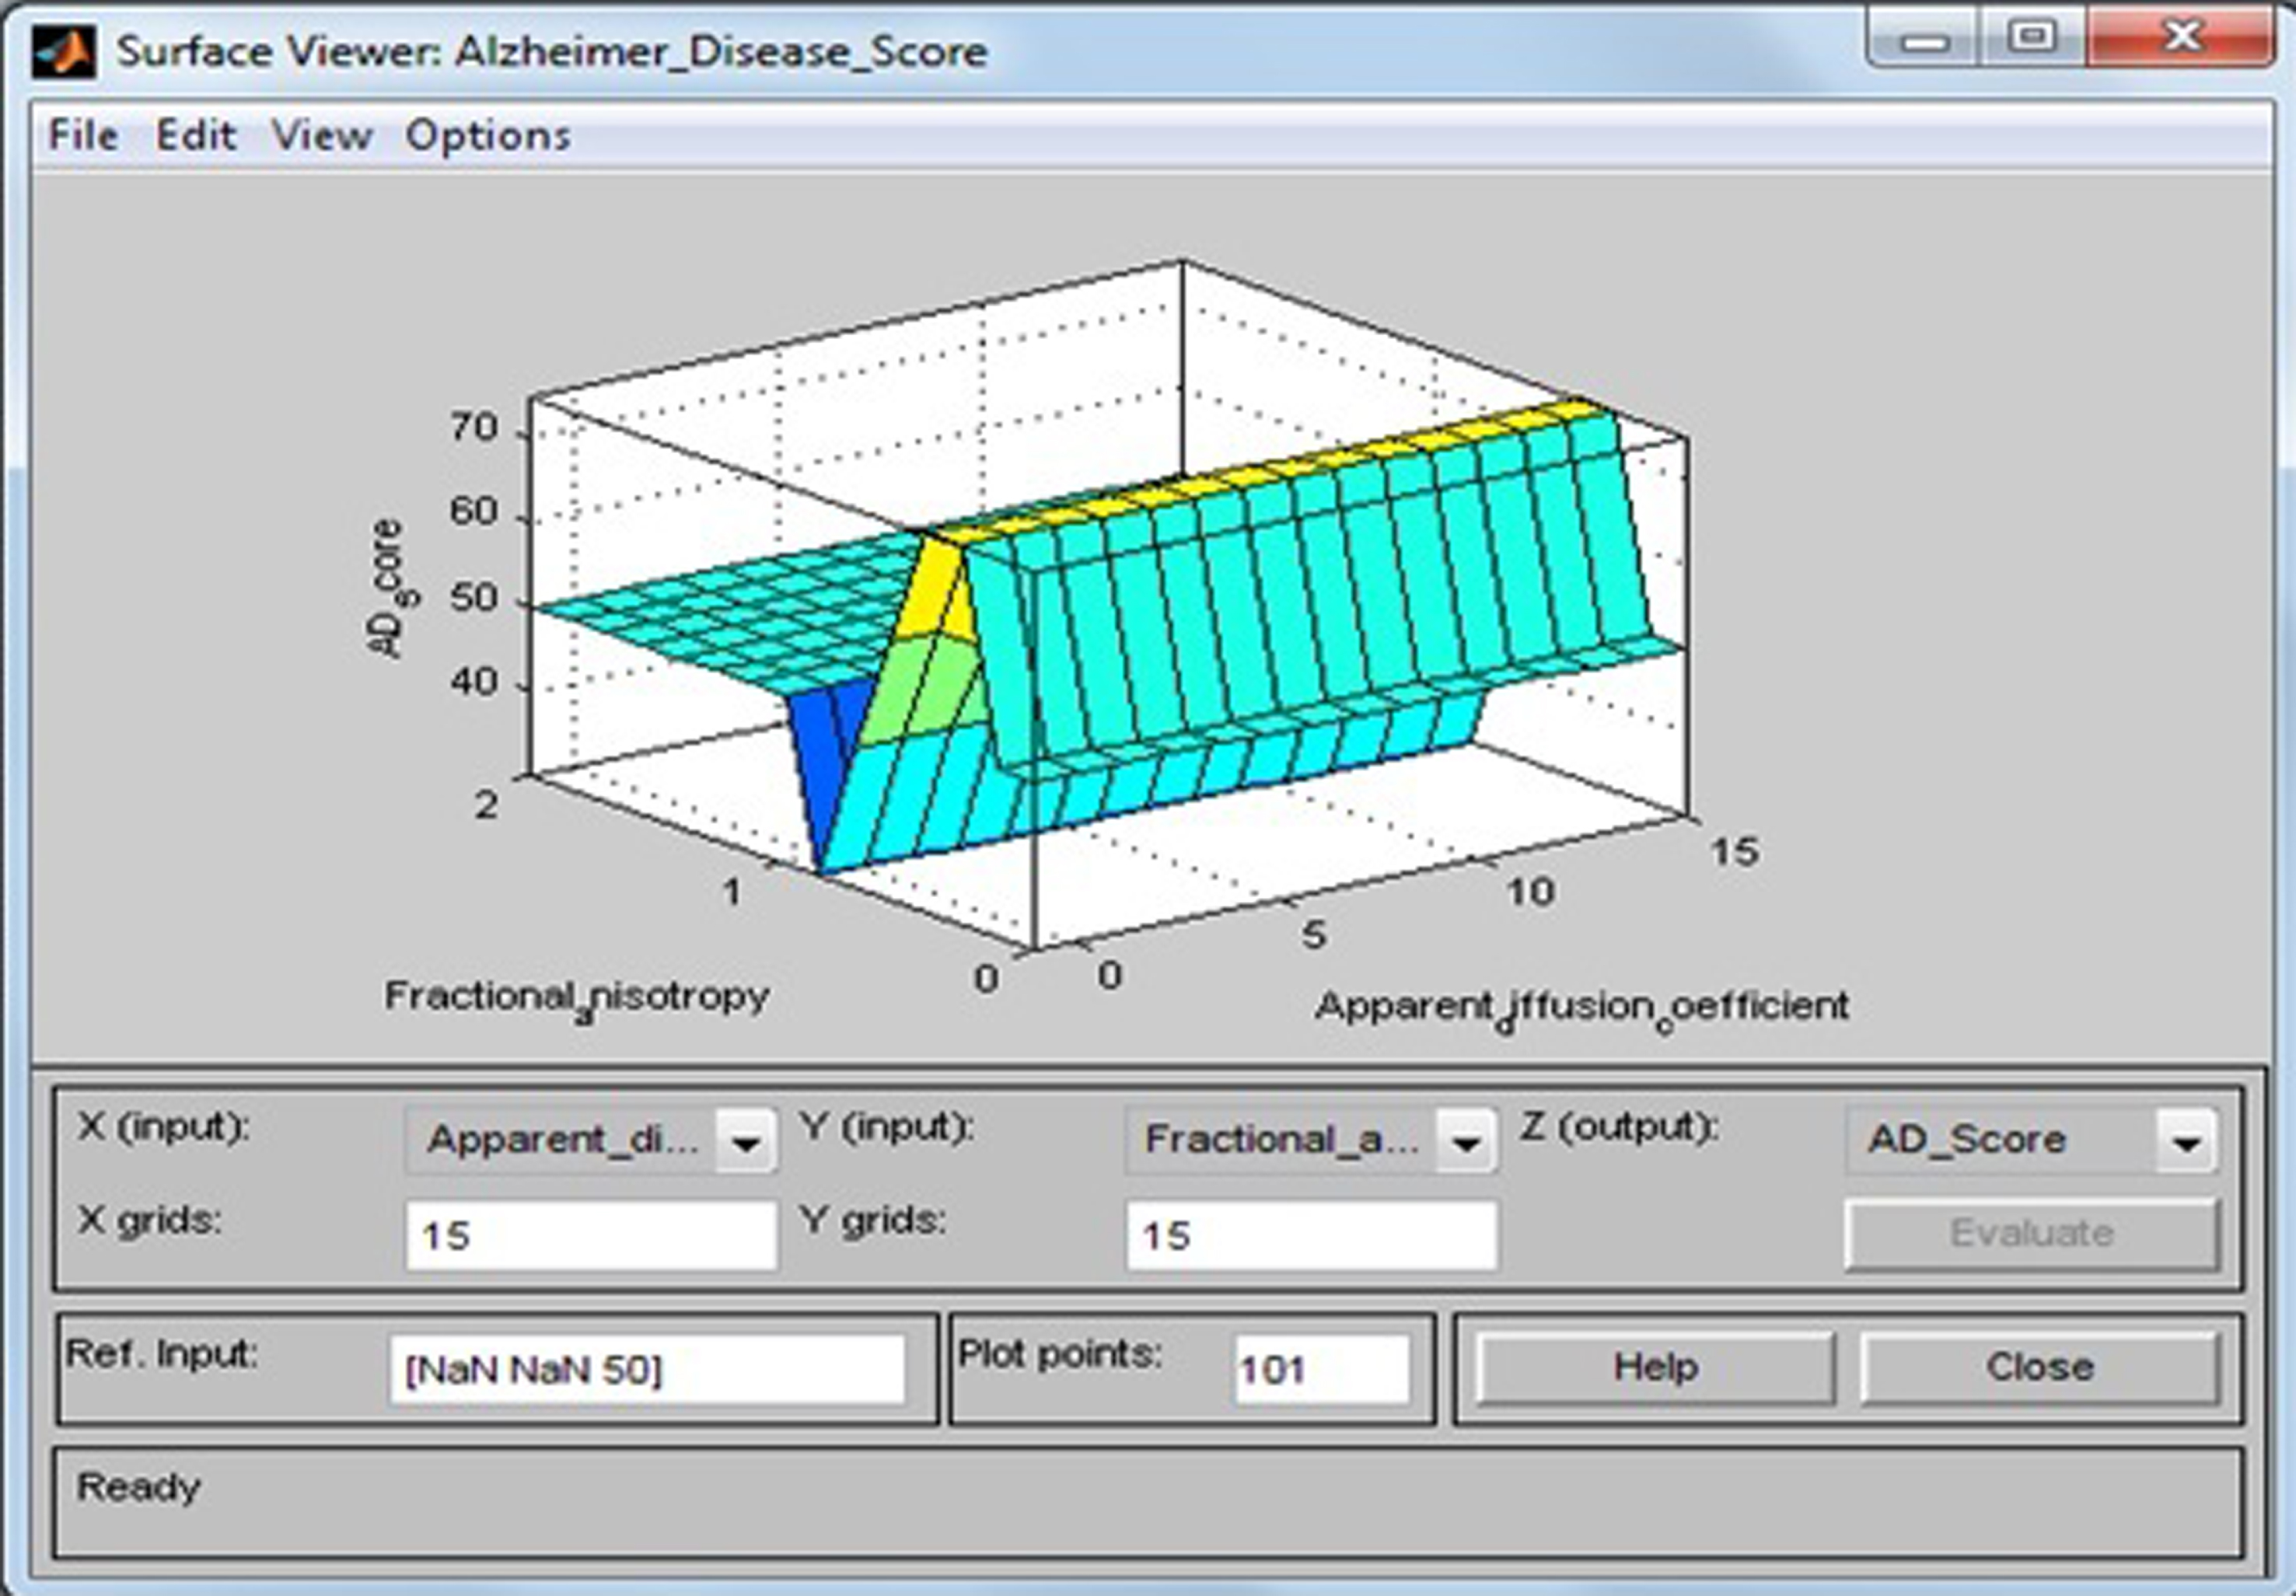 Surface viewer of apparent diffusion coefficient and fractional anisotropy.